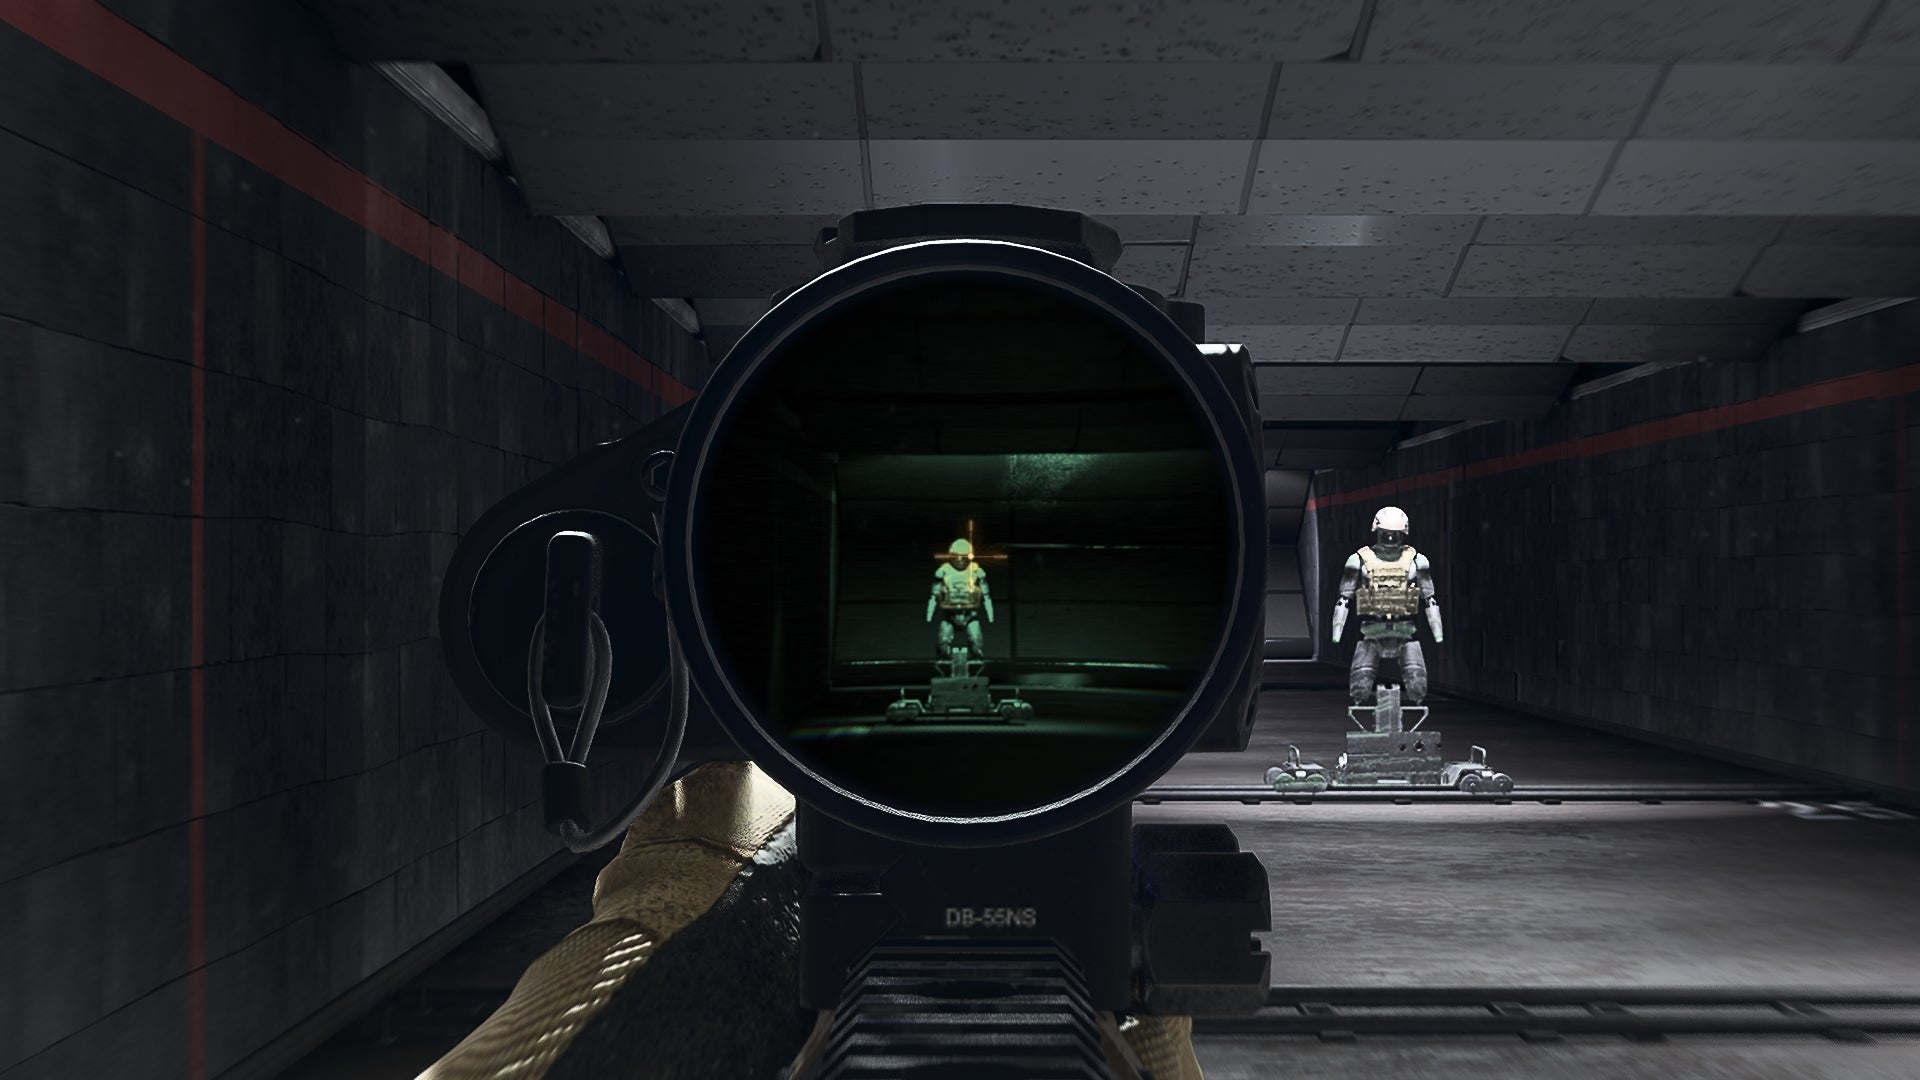 The player in Warzone 2.0 aims at a training dummy using the Schlager Night View optic attachment.